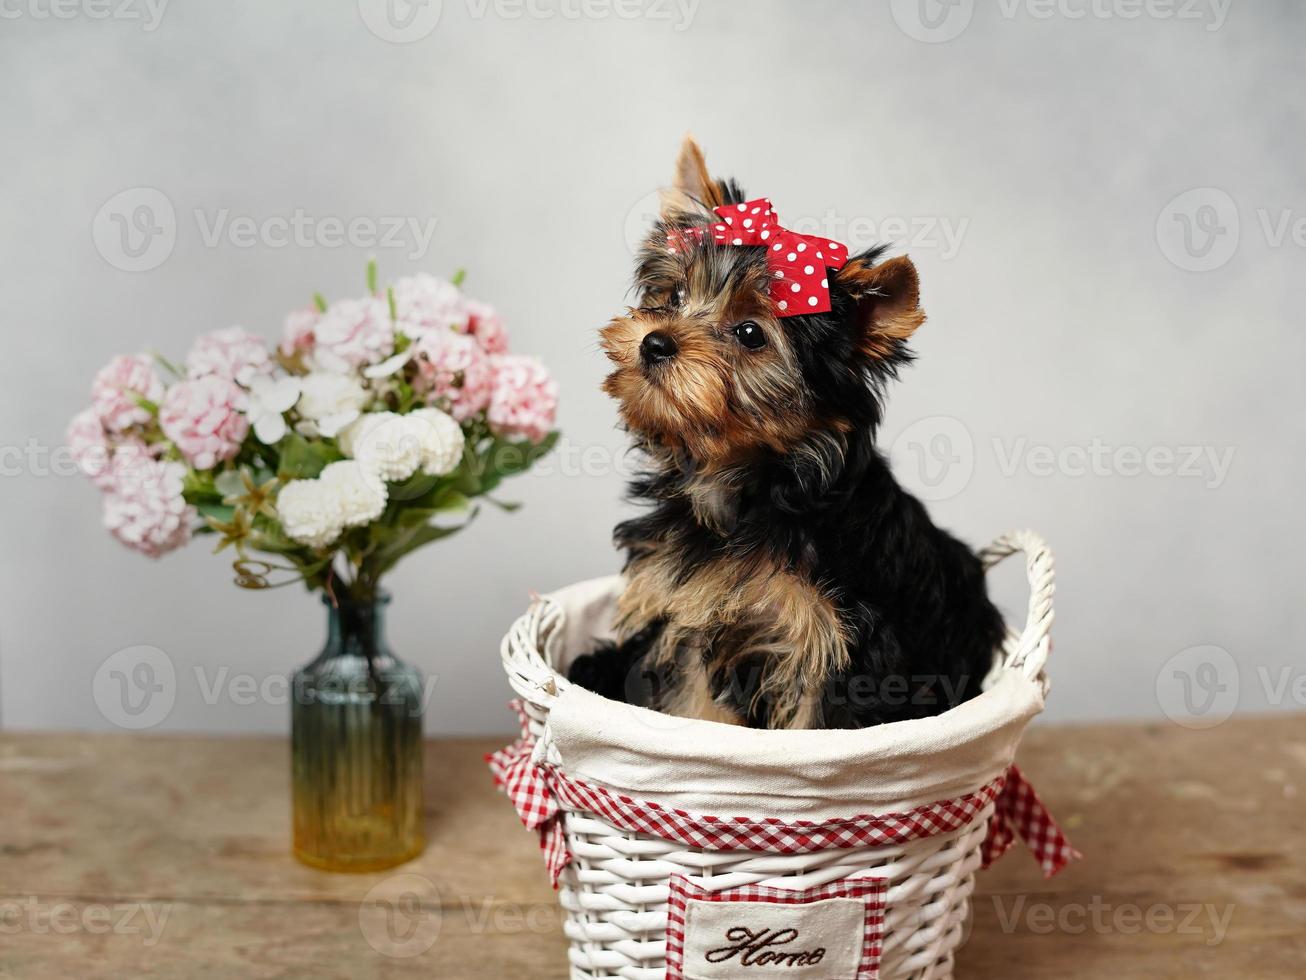 A cute, fluffy Yokrshire Terrier Puppy Sits in a white wicker basket against a white background. The puppy has a red bow on its head, a vase with pink flowers stands nearby. Copy space photo